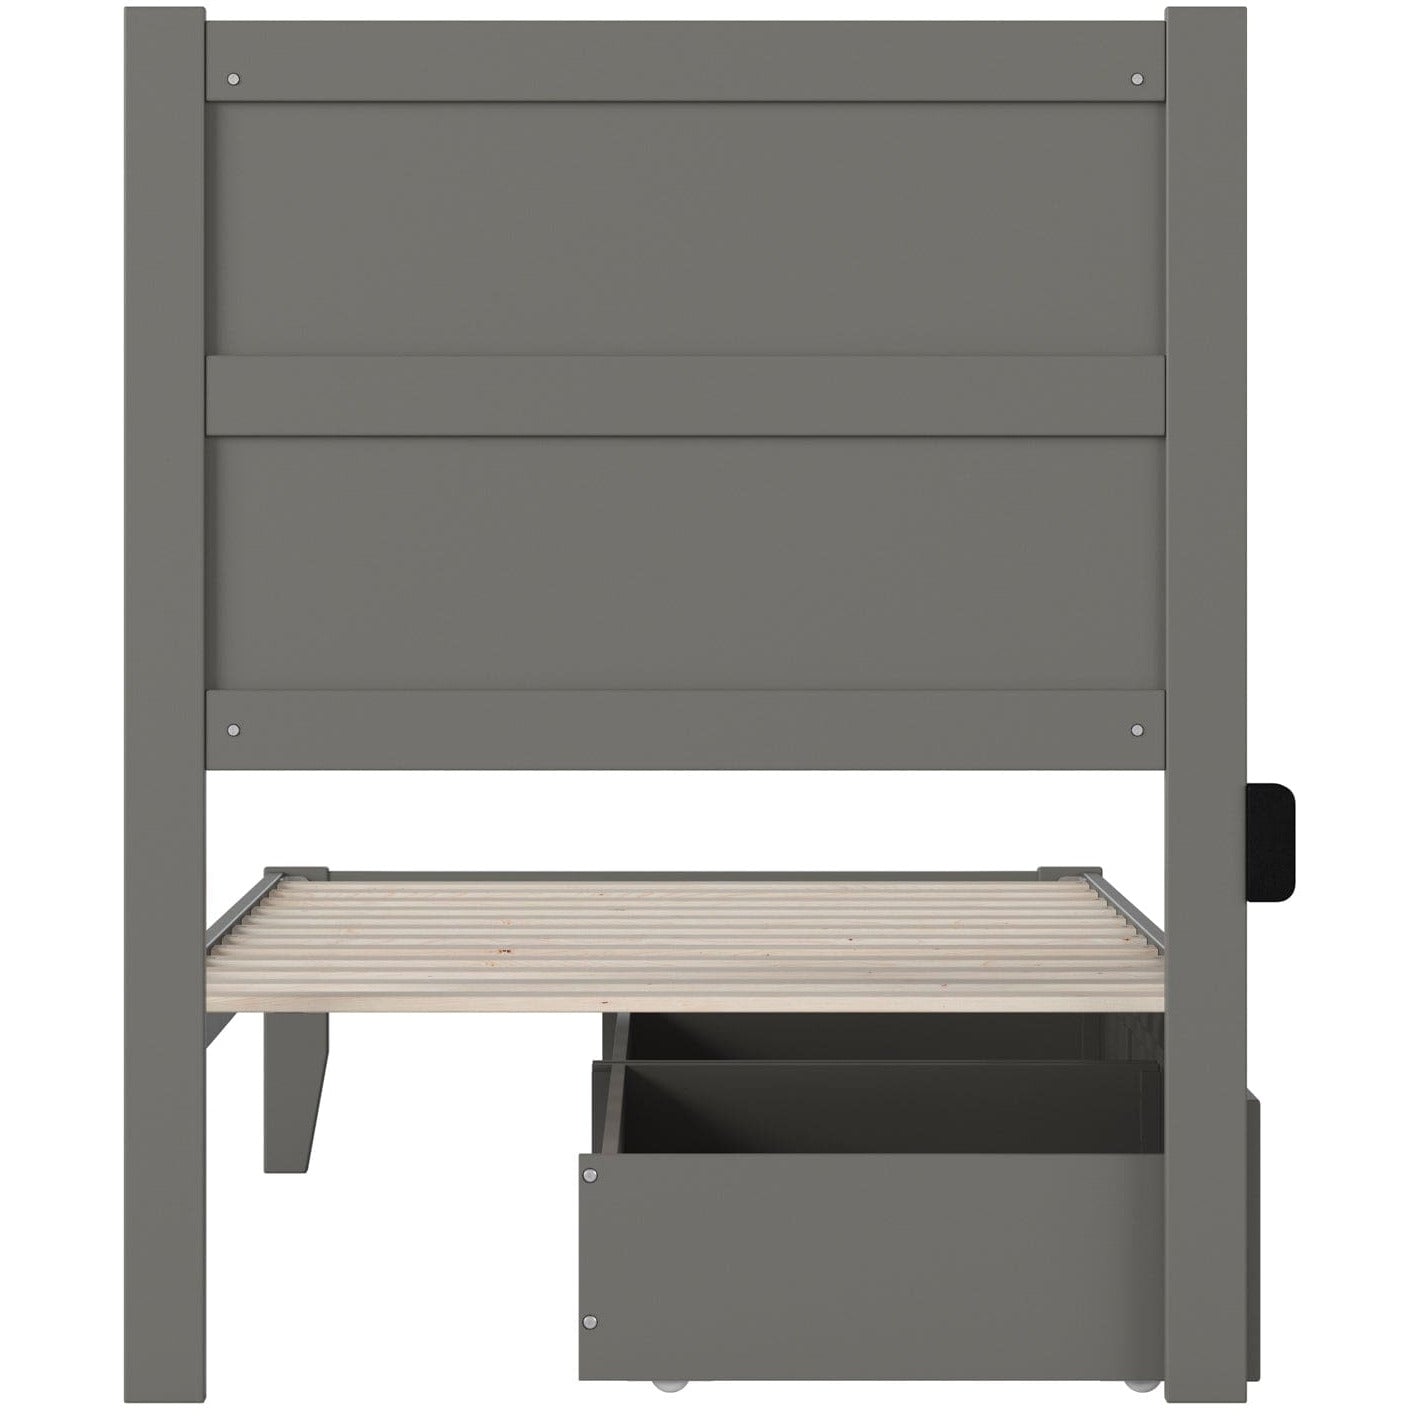 AFI Furnishings NoHo Twin Bed with 2 Drawers in Grey AG9113329